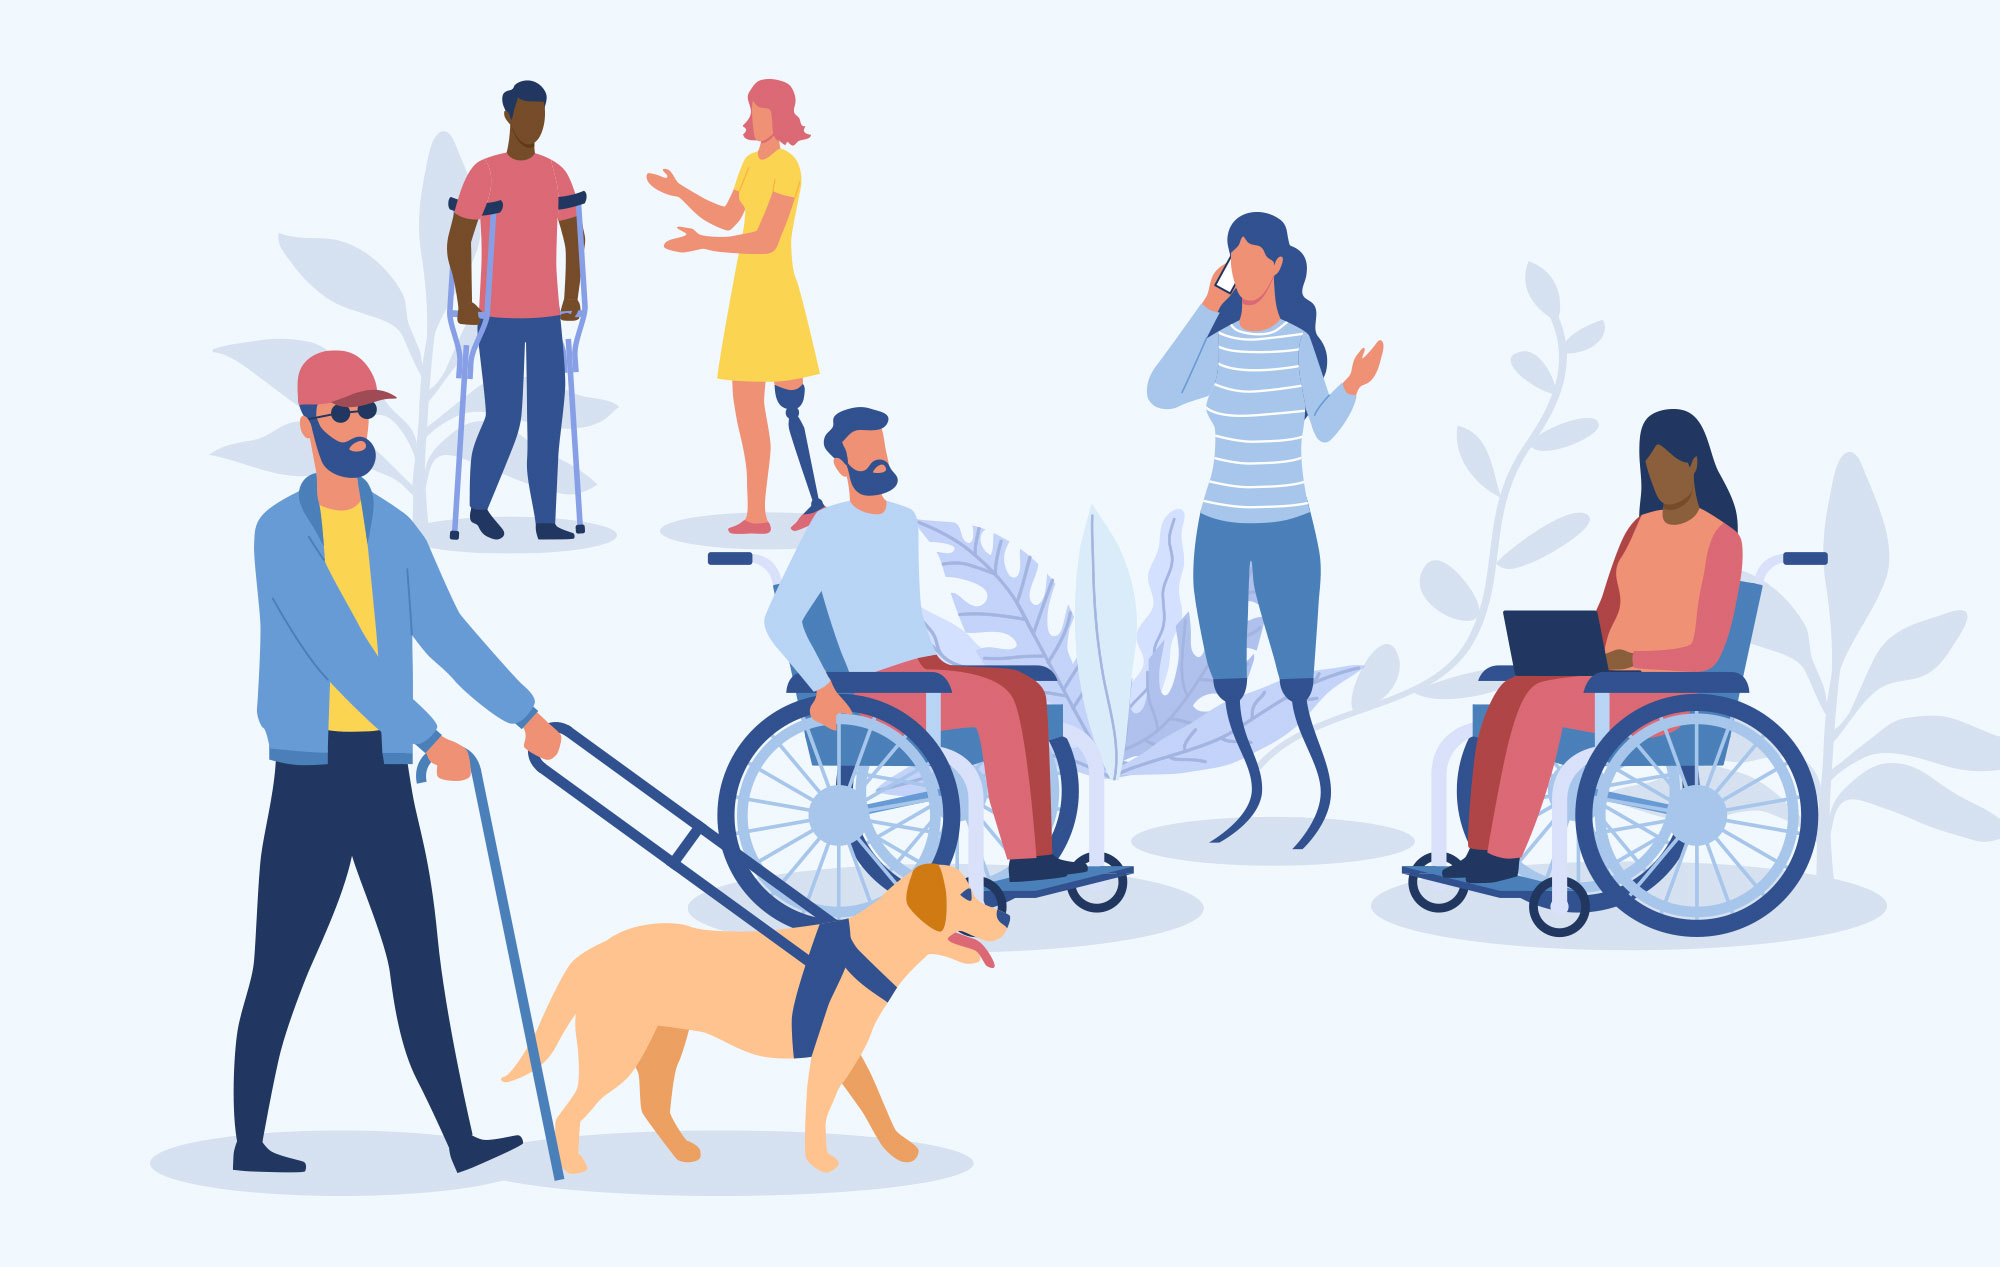 Illustration of various people with disabilities utilizing assistive devices such as wheelchairs, crutches, a cane, and a seeing-eye dog. 